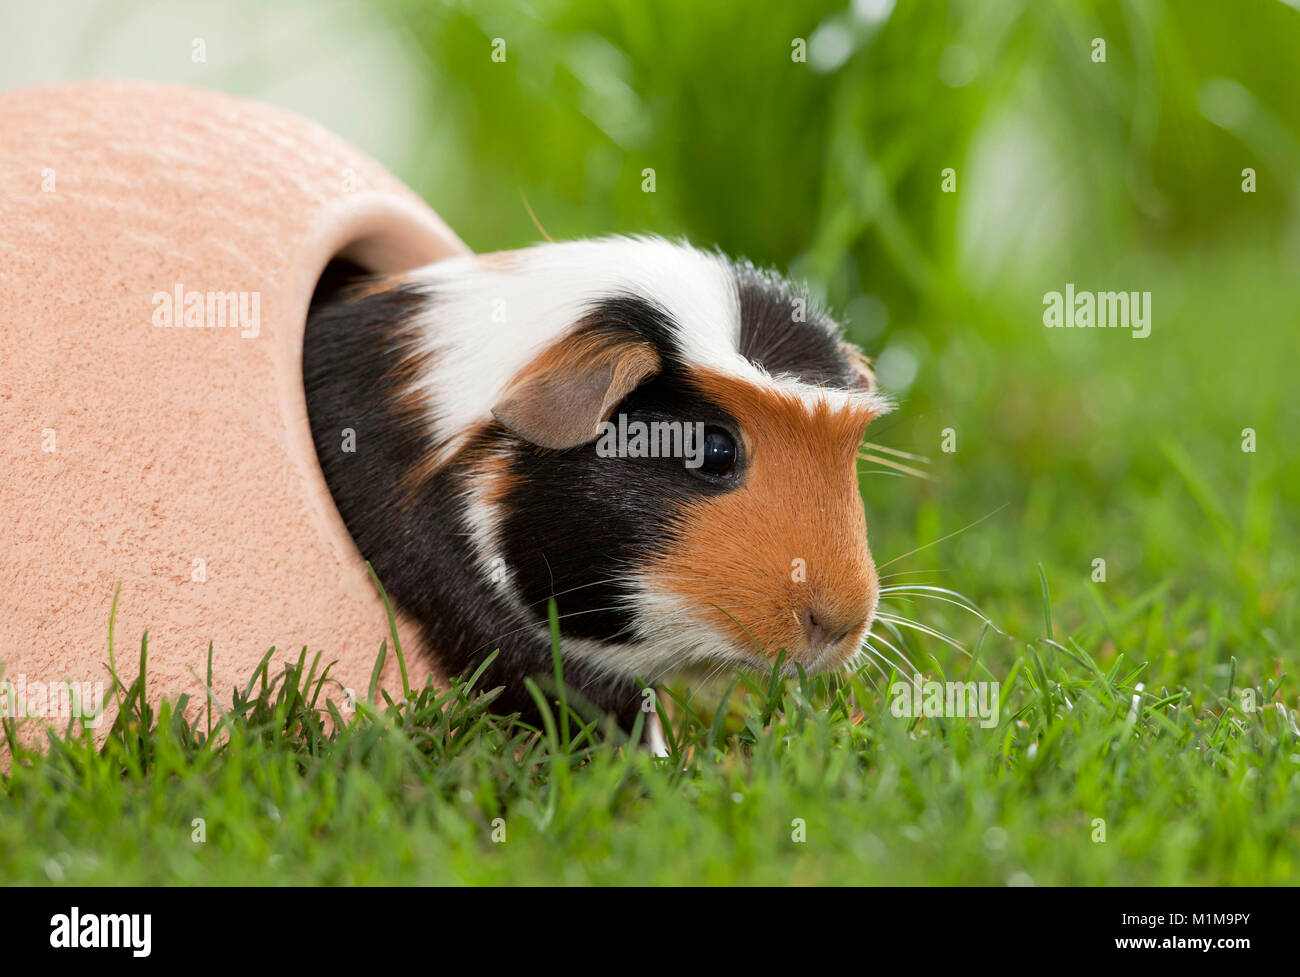 English Crested Guinea Pig, Cavie coming out of its retreat onto a lawn. Germany Stock Photo